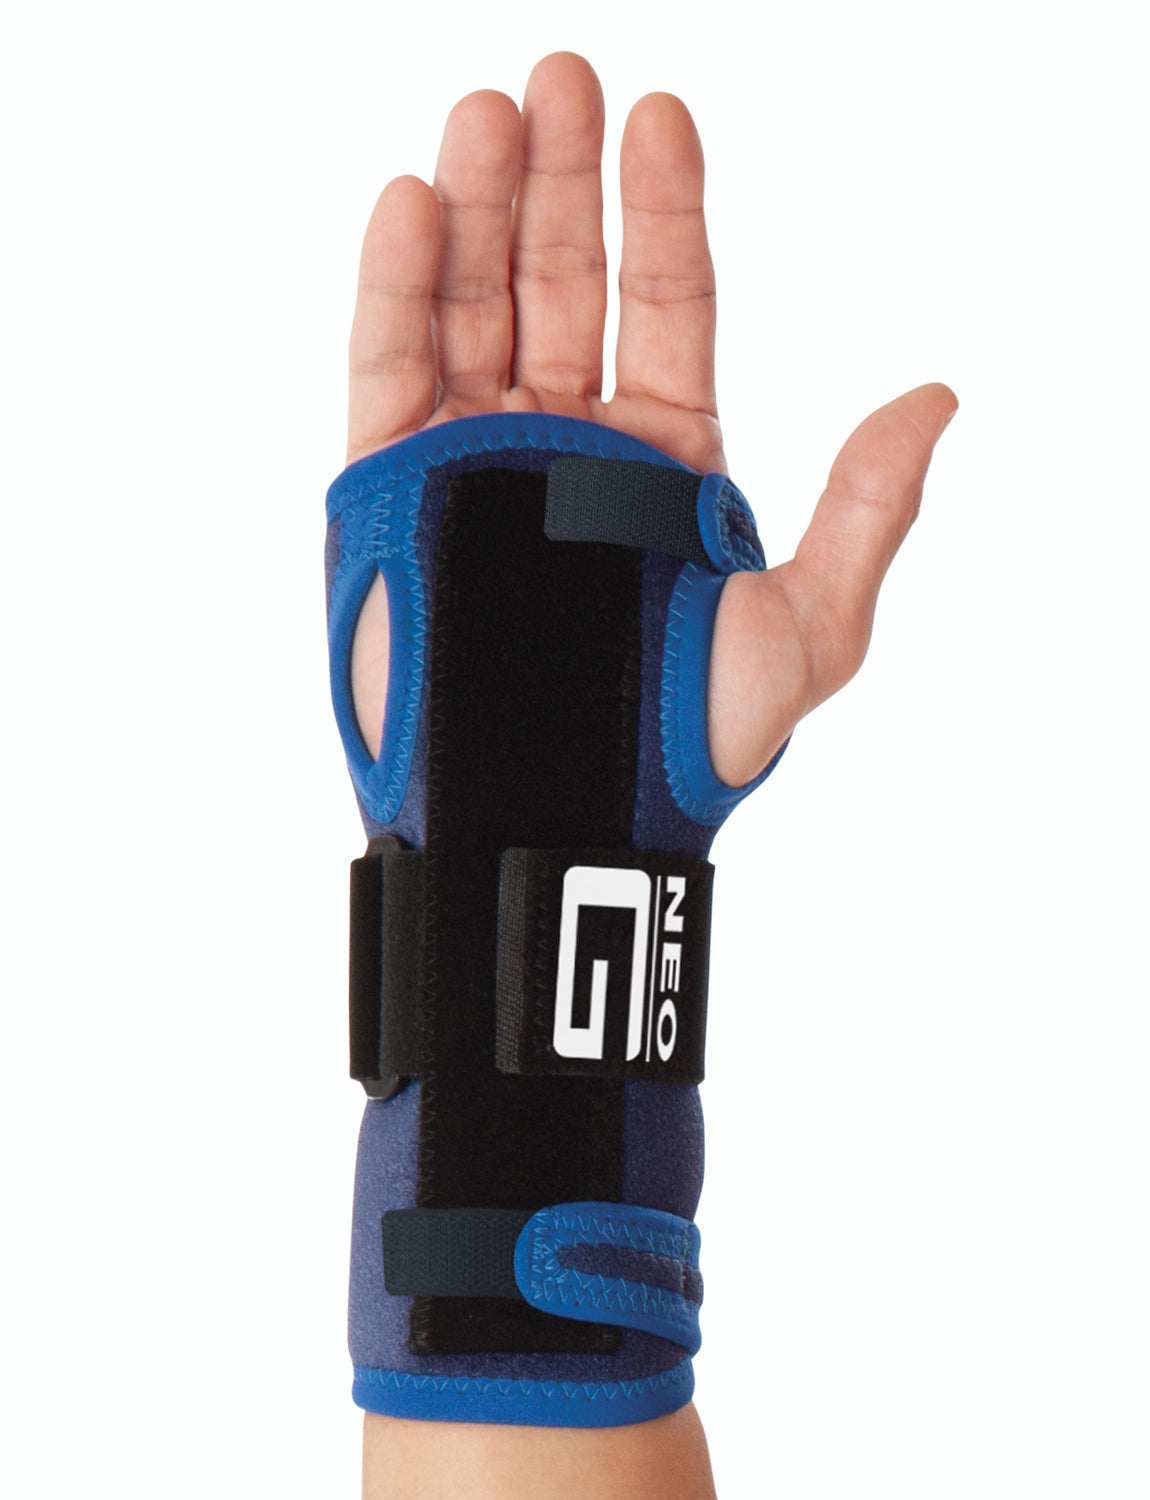  Neo-G Wrist Brace for arthritis pain and support - for